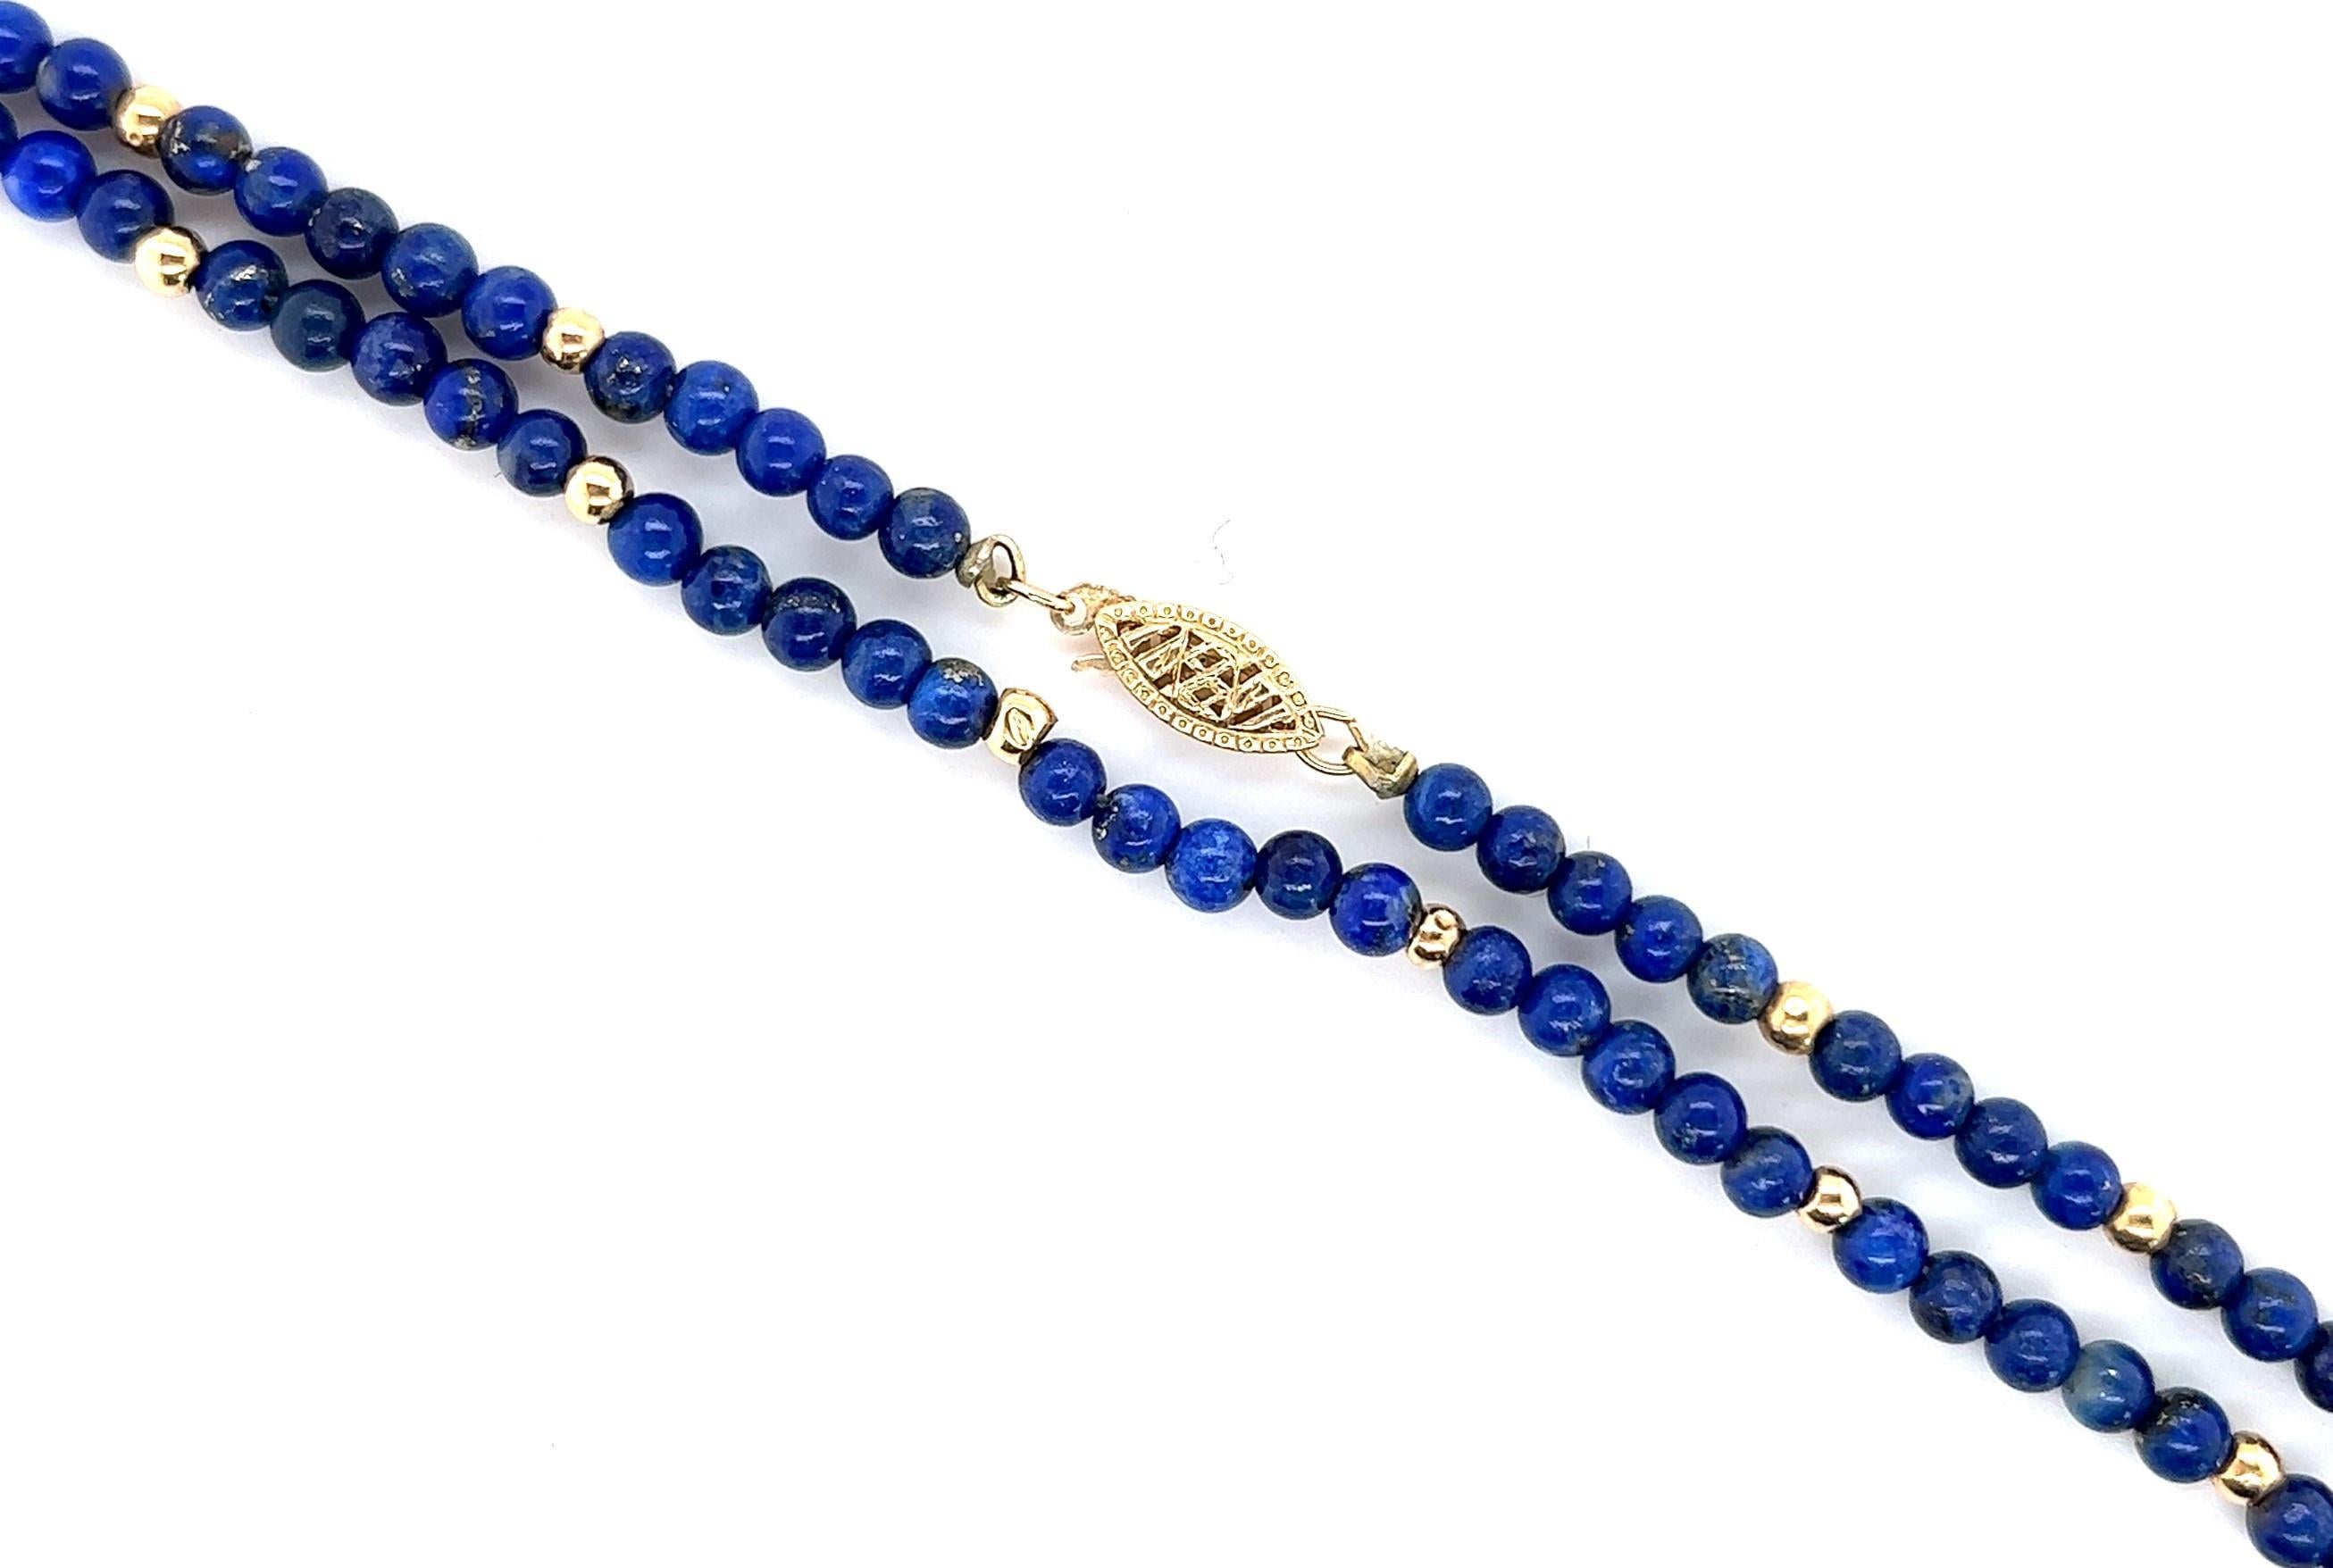 Wonderful quality Lapis Lazuli necklace containing 4.50mm round lapis and 3.15mm 14kt yellow gold beads. 

The necklace is 26 inches long.

Wear it as one long strand of beads or double it if your necklace accommodates that length. This can be worn